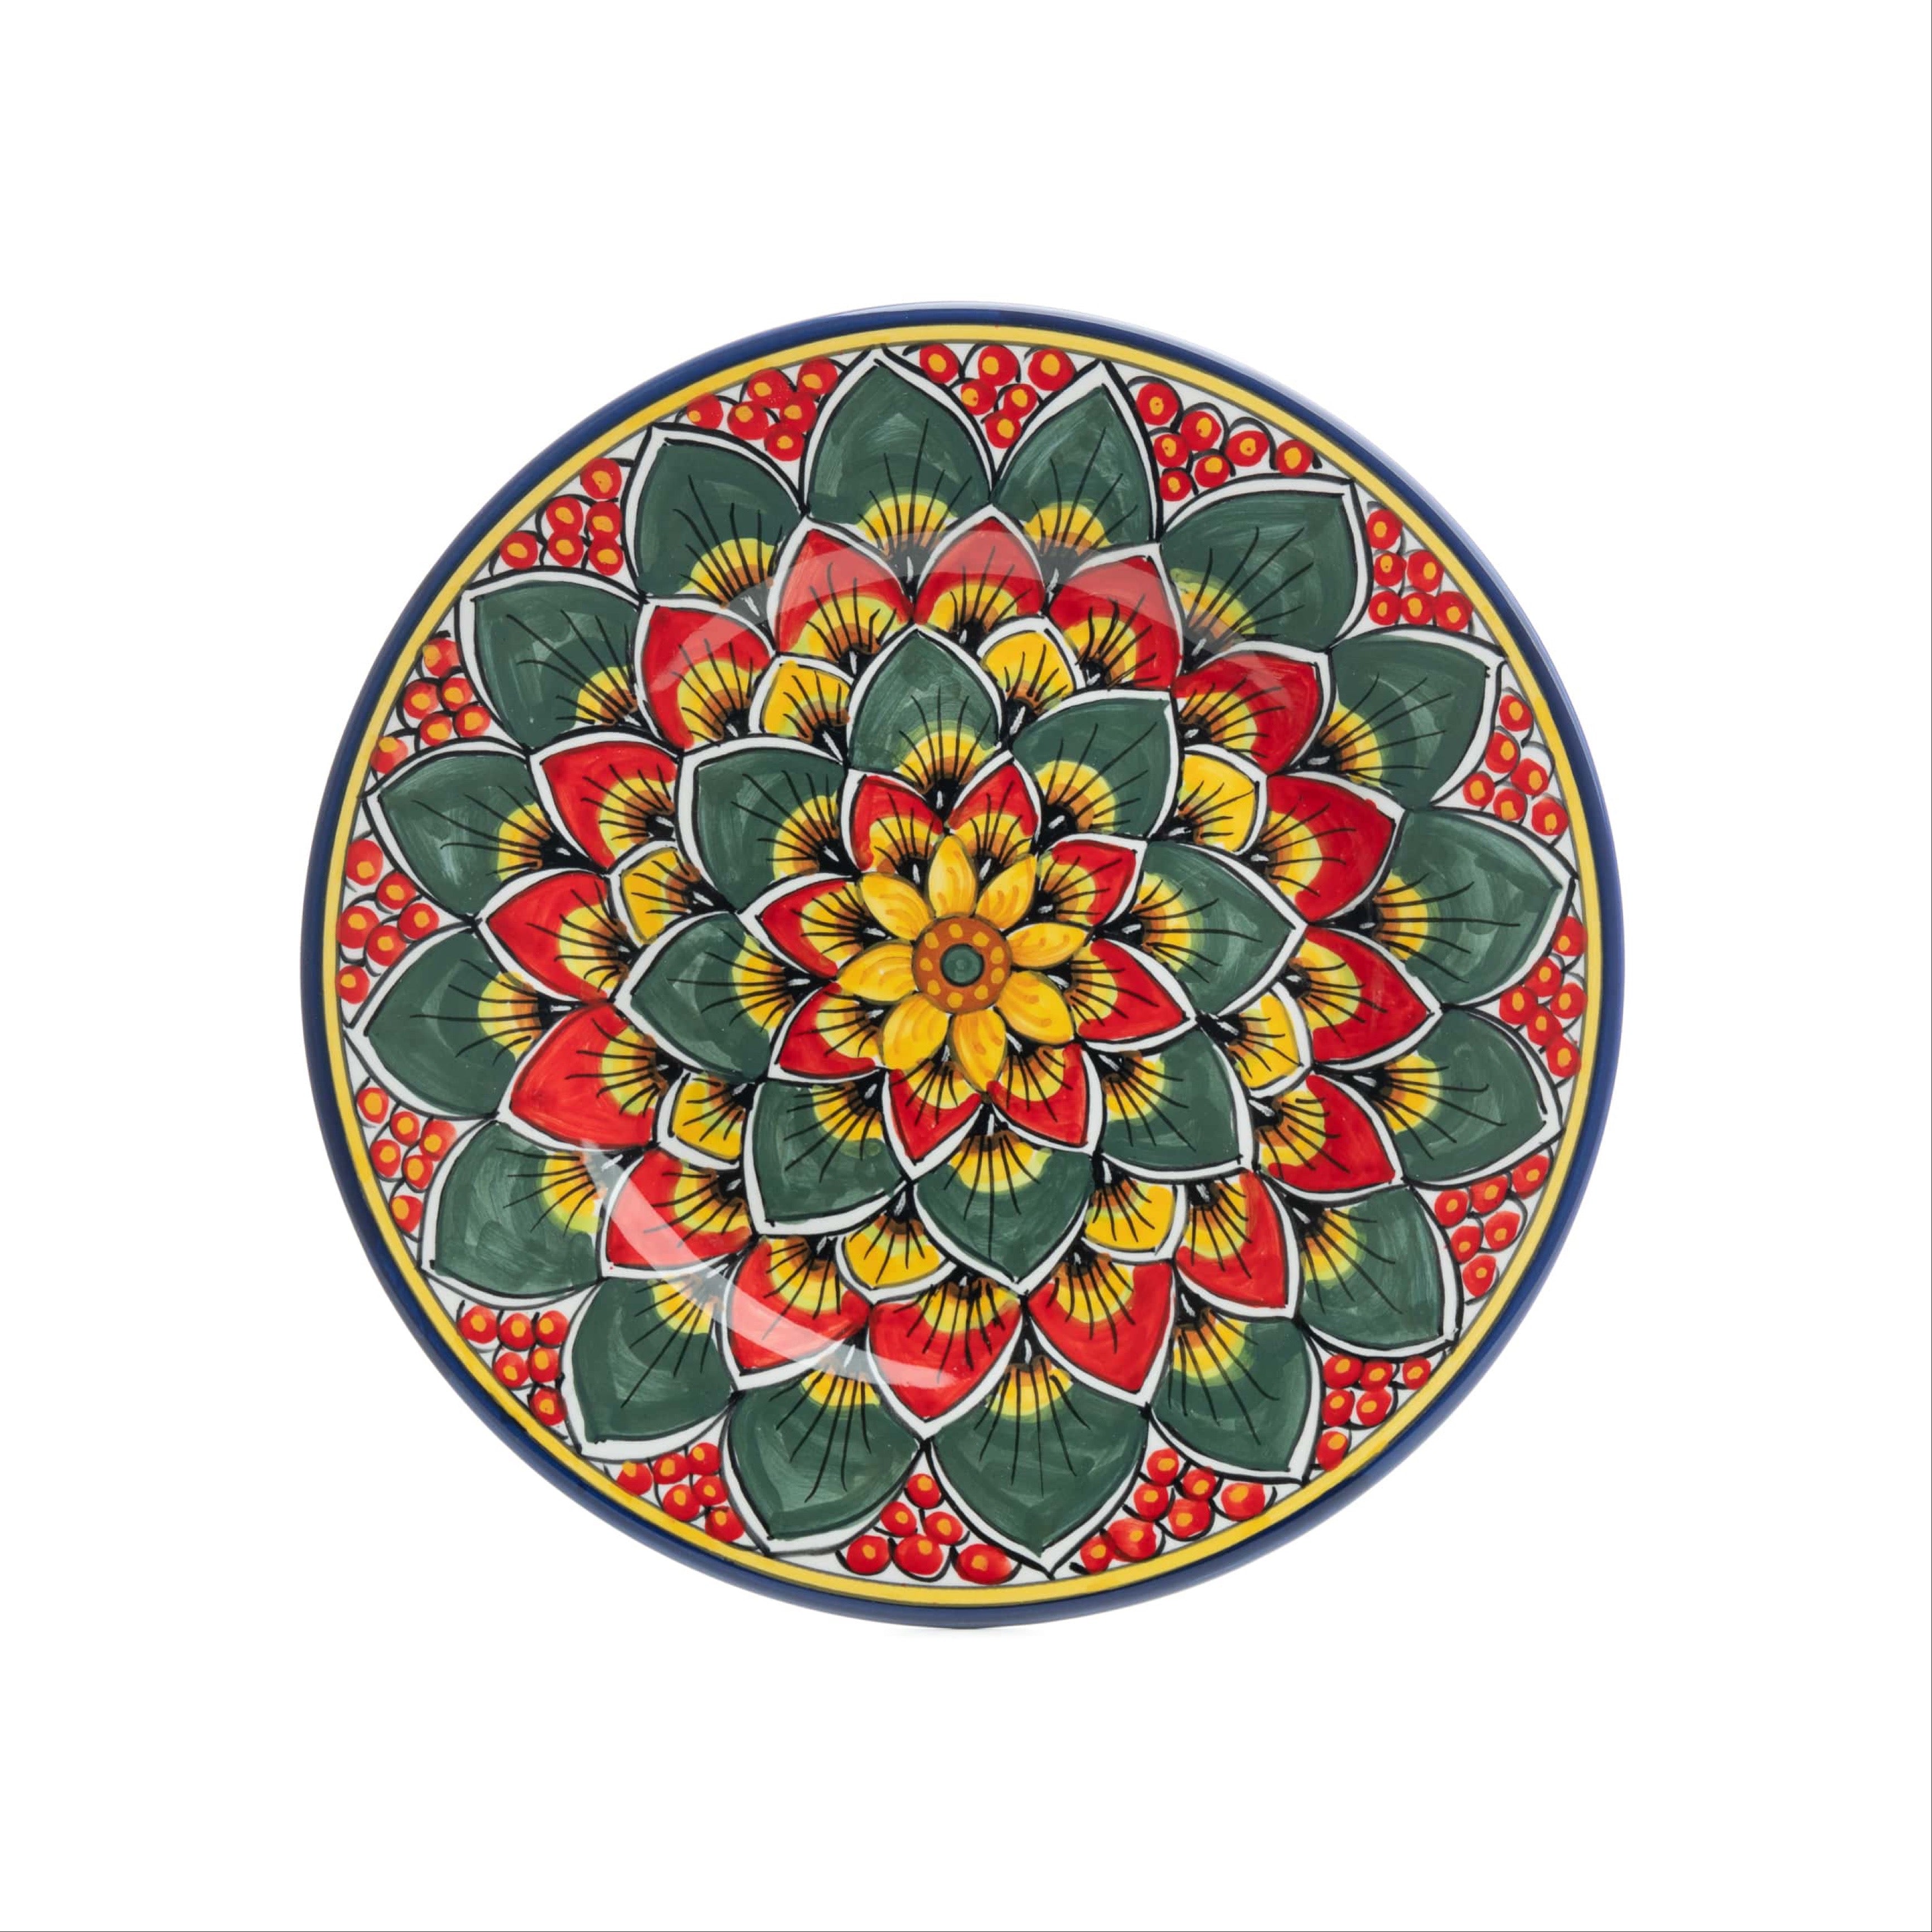 Geribi Peacock Design (PG03): Salad Plate - (Red, Green & Yellow), ceramics, pottery, italian design, majolica, handmade, handcrafted, handpainted, home decor, kitchen art, home goods, deruta, majolica, Artisan, treasures, traditional art, modern art, gift ideas, style, SF, shop small business, artists, shop online, landmark store, legacy, one of a kind, limited edition, gift guide, gift shop, retail shop, decorations, shopping, italy, home staging, home decorating, home interiors